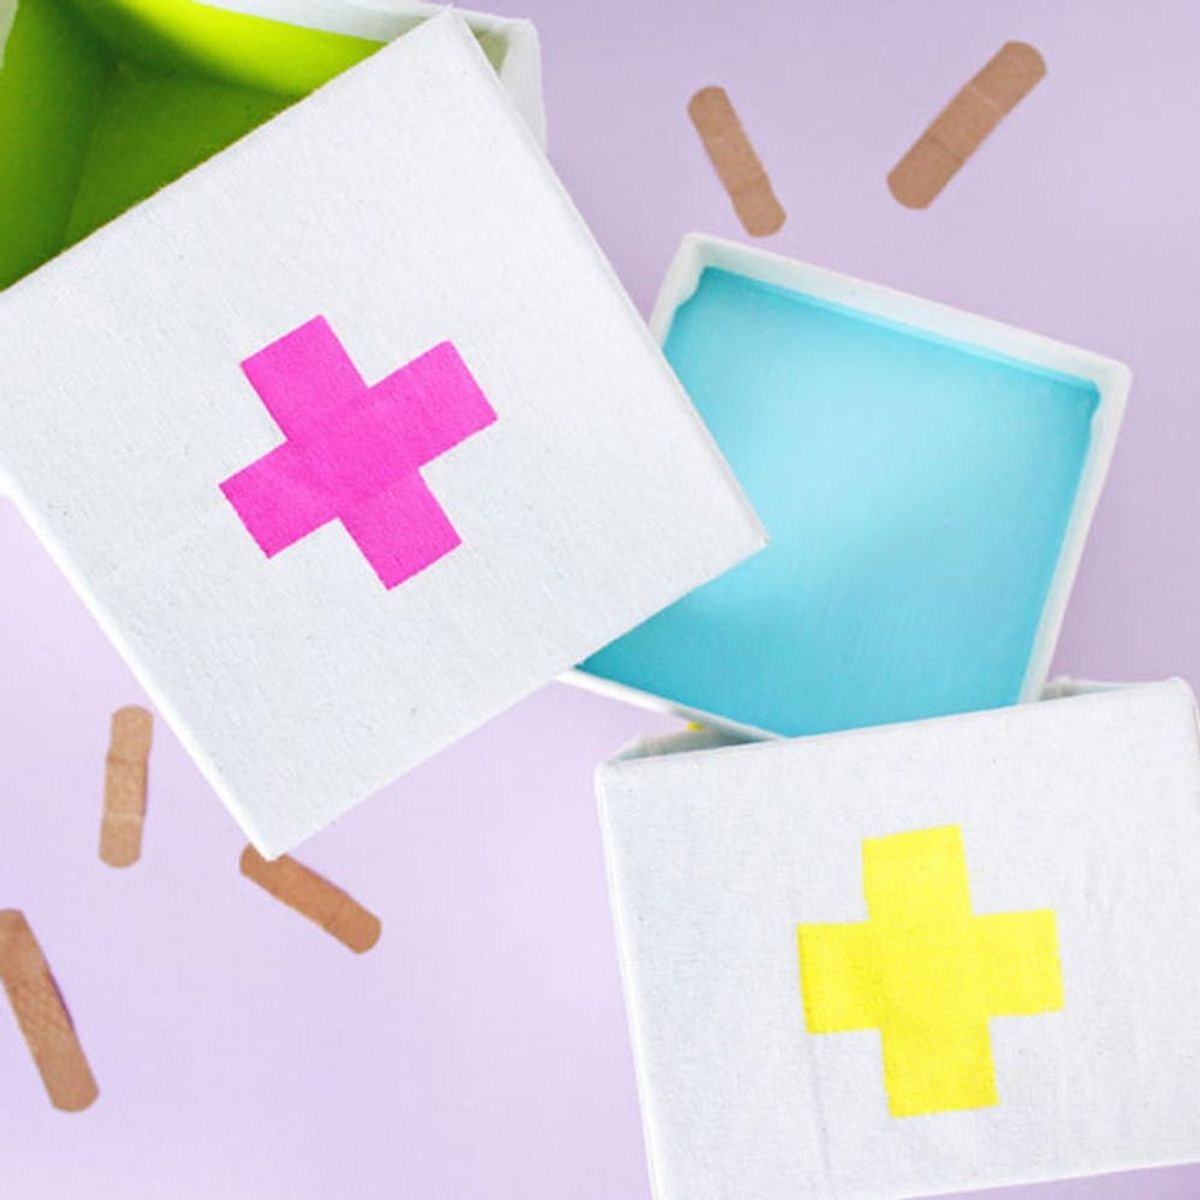 Get Through the Season With This DIY Winter First Aid Kit